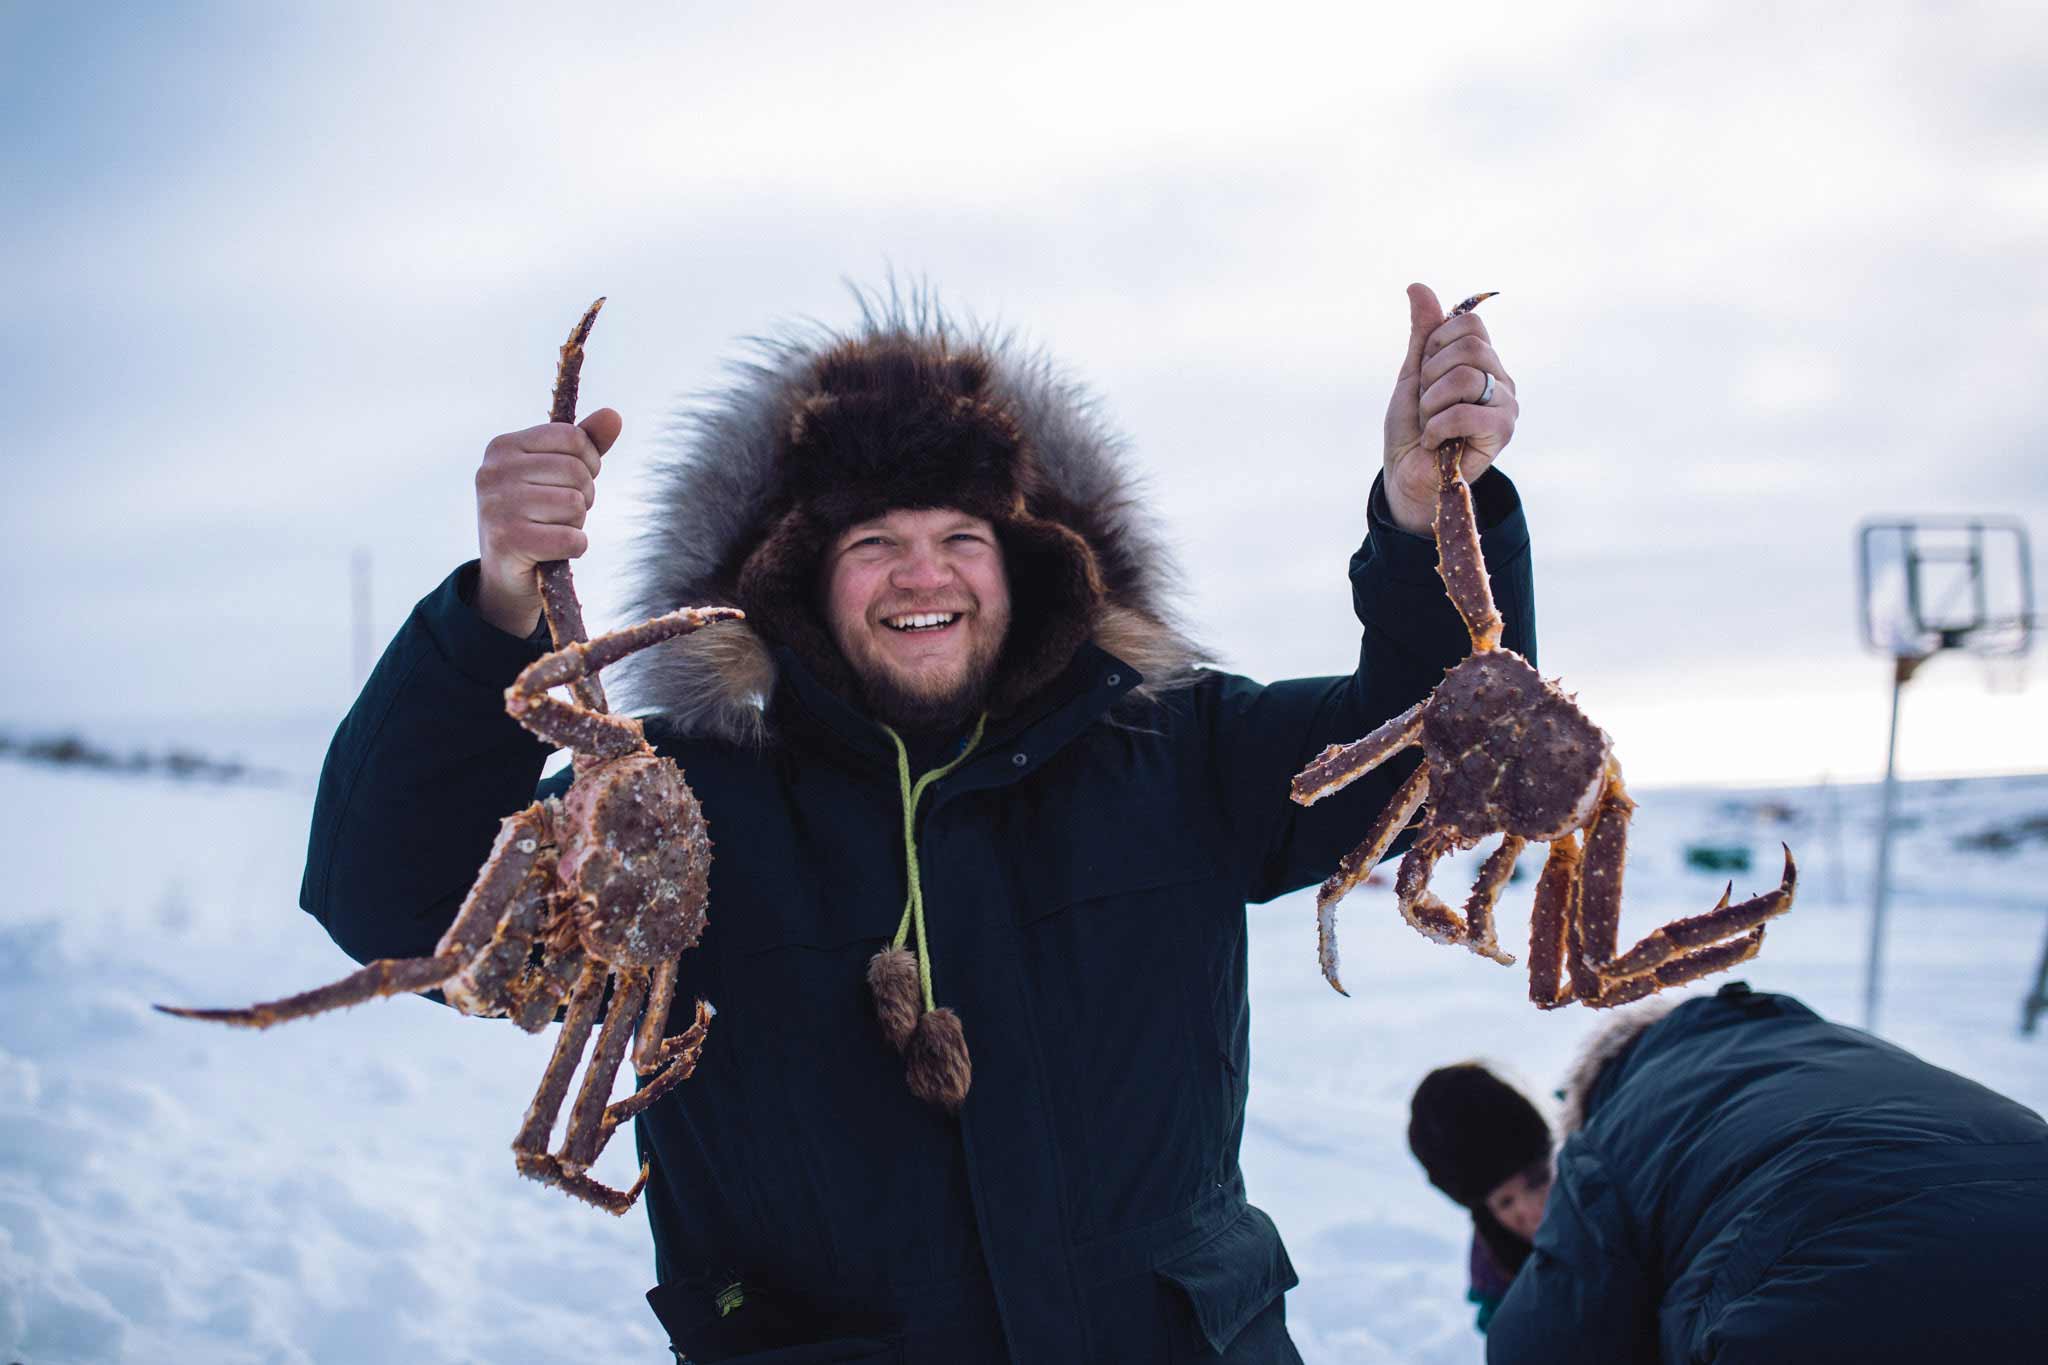 dave showing off king crabs in Nome